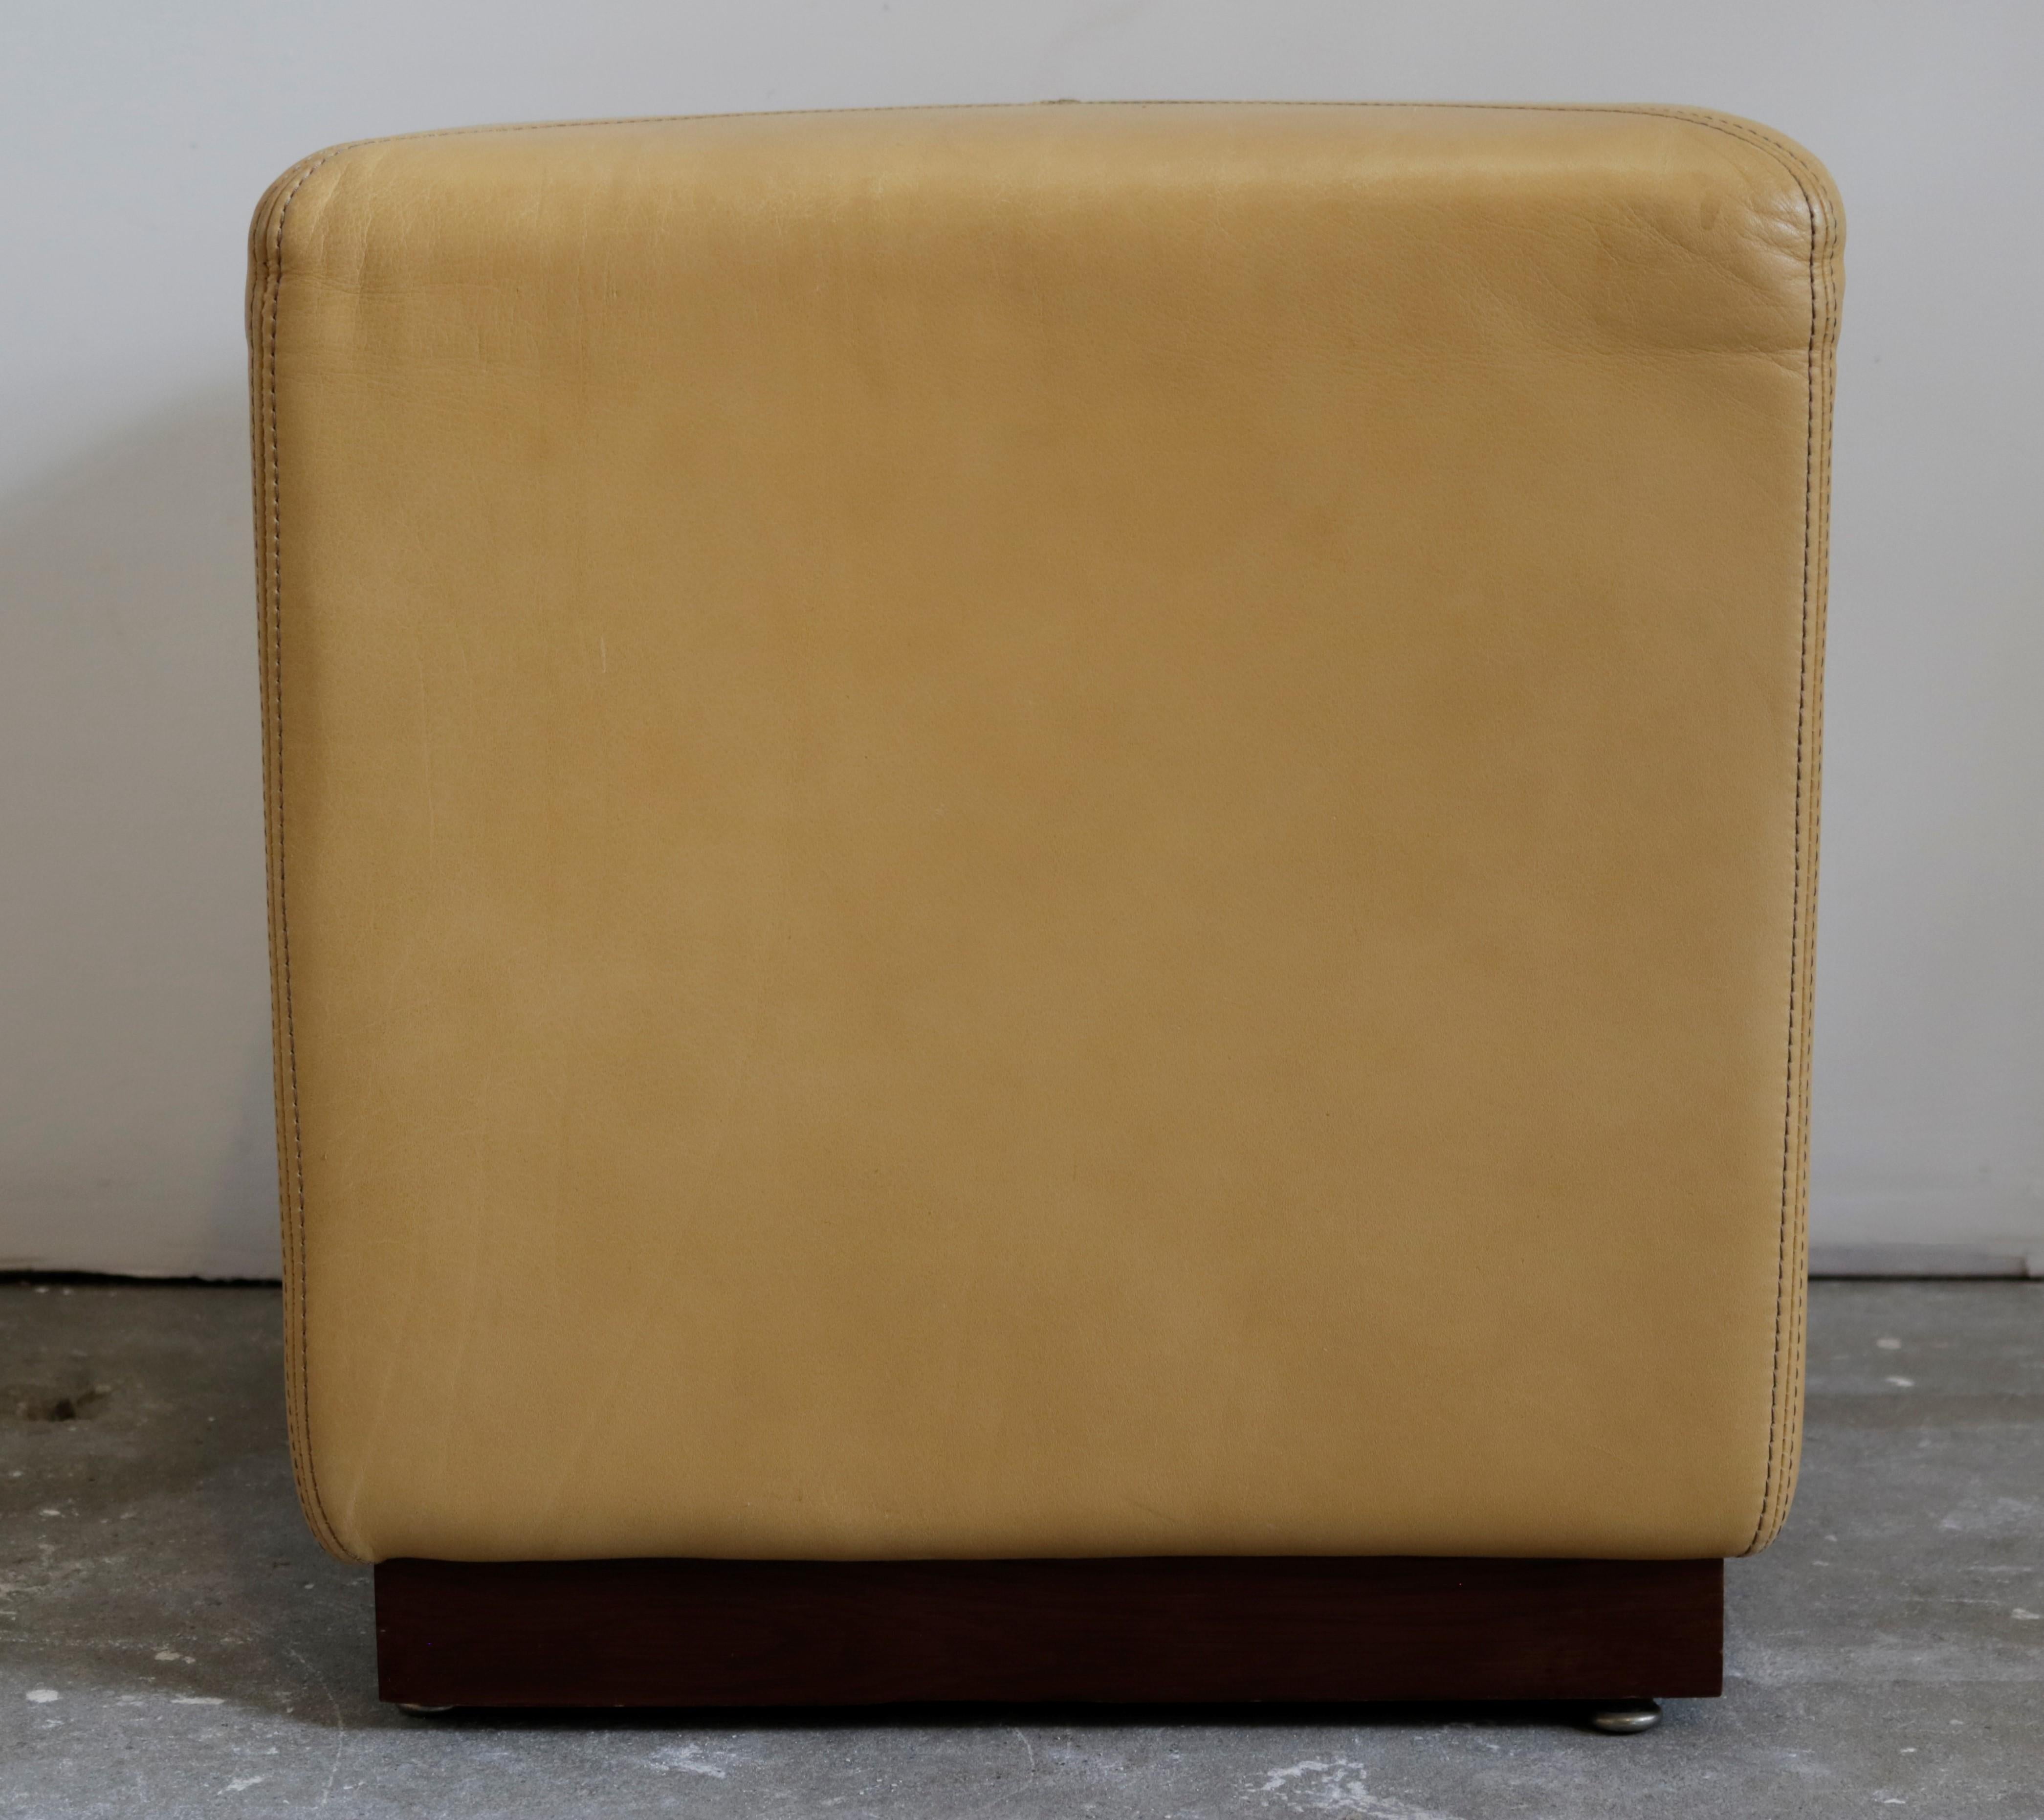 Post-Modern Pair of Camel Leather Stools